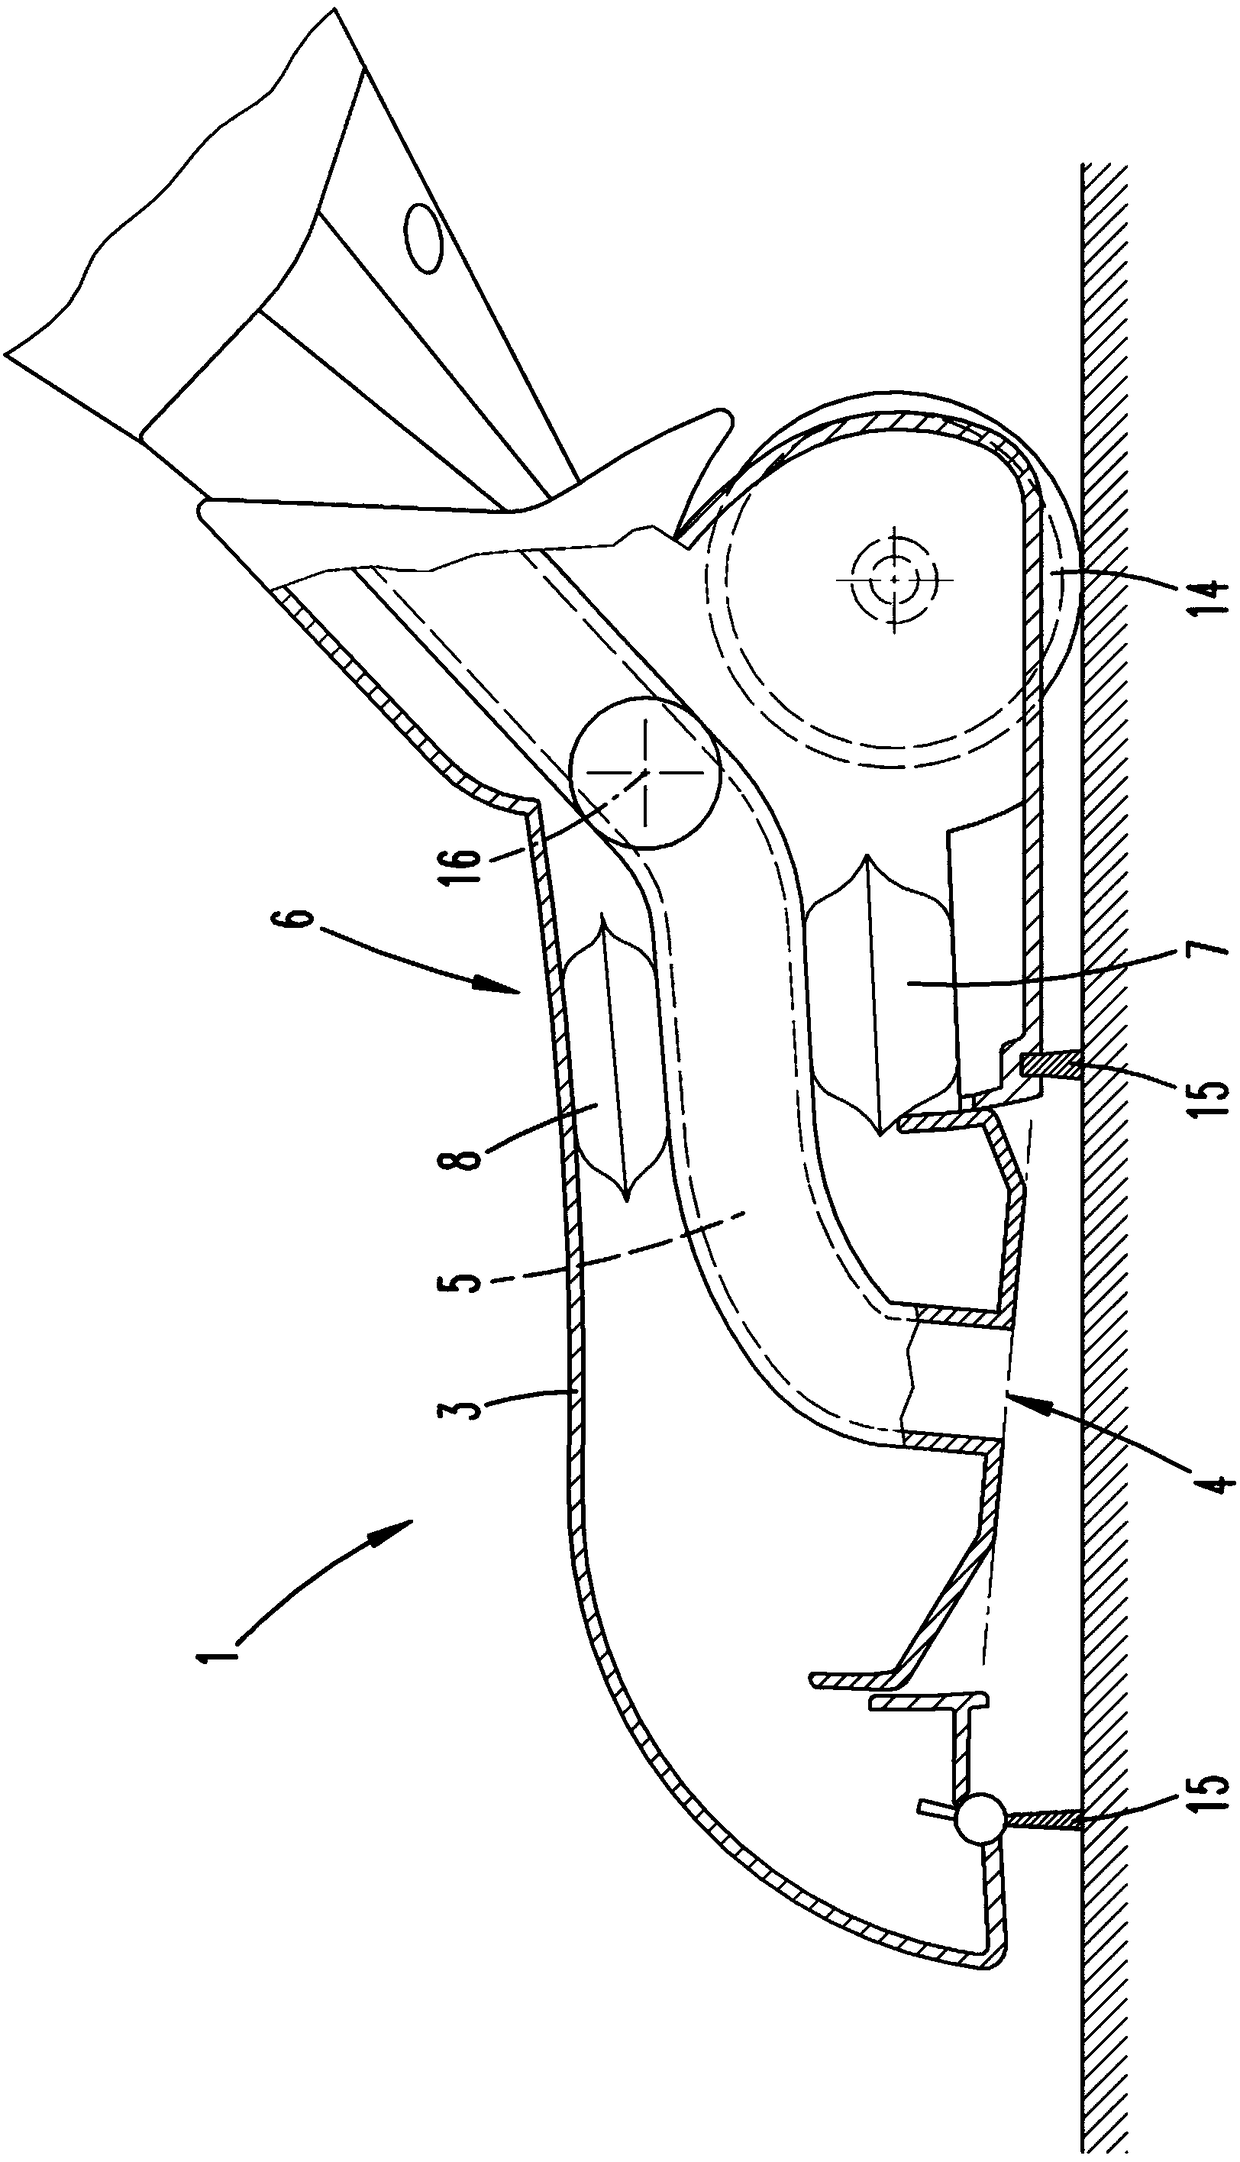 Suction nozzle for a vacuum cleaning device